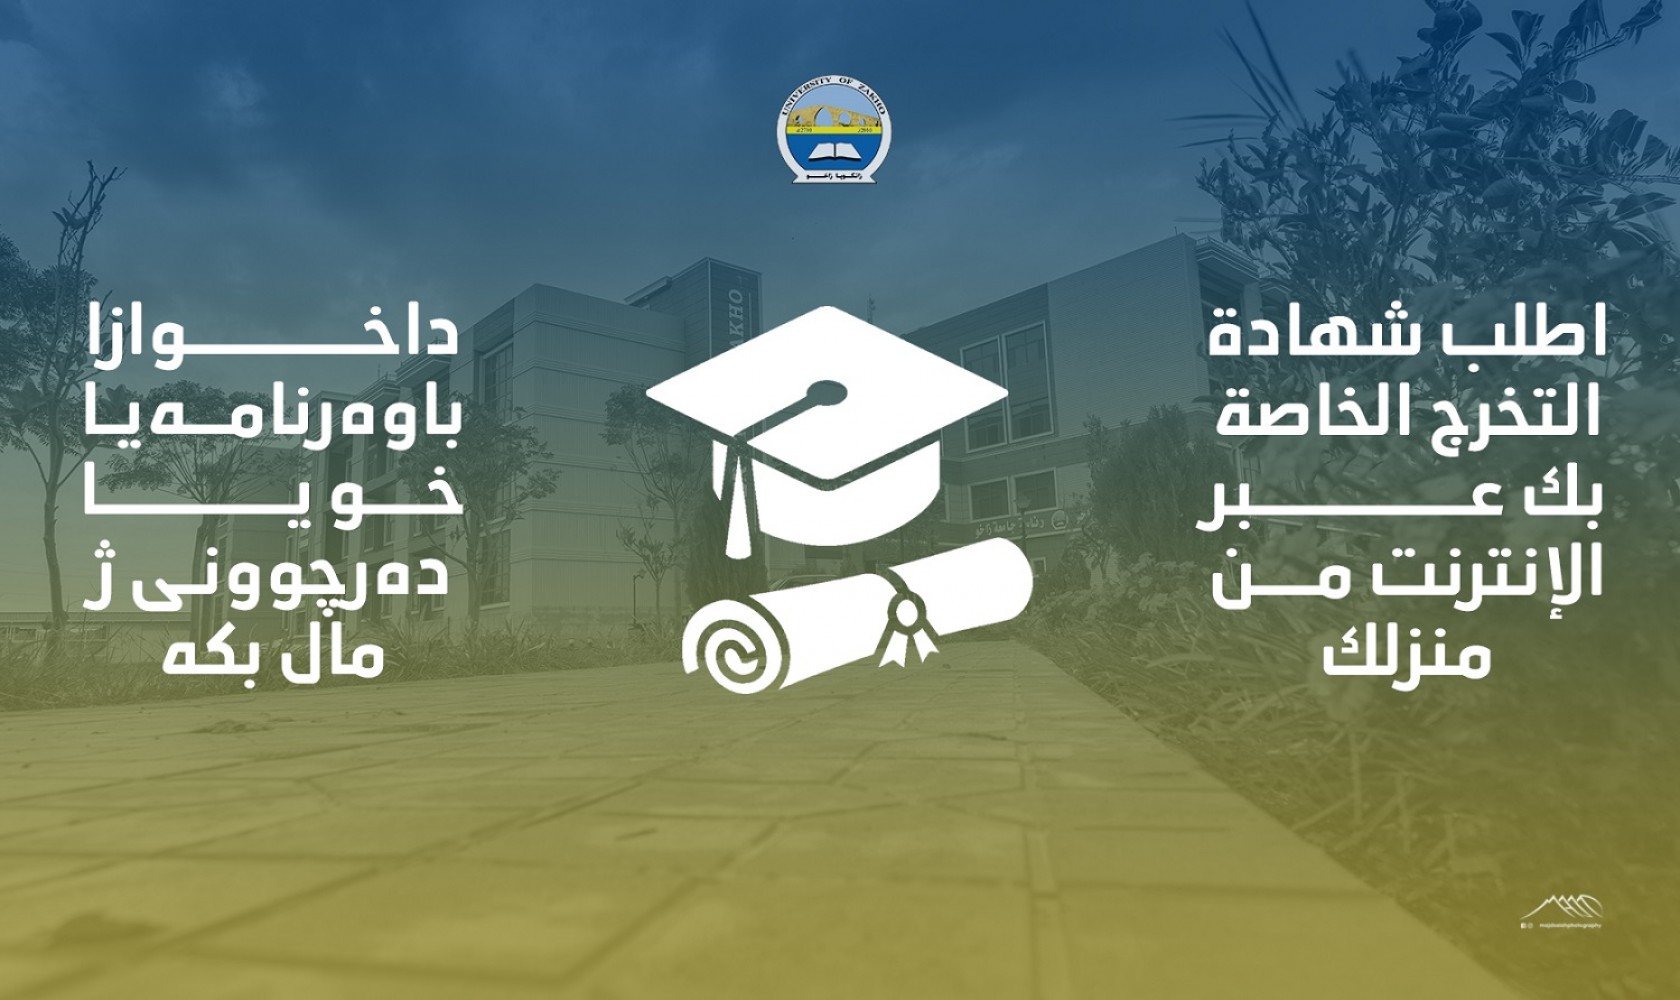 Request Your Graduation Certificate And Other Supporting Letters Online